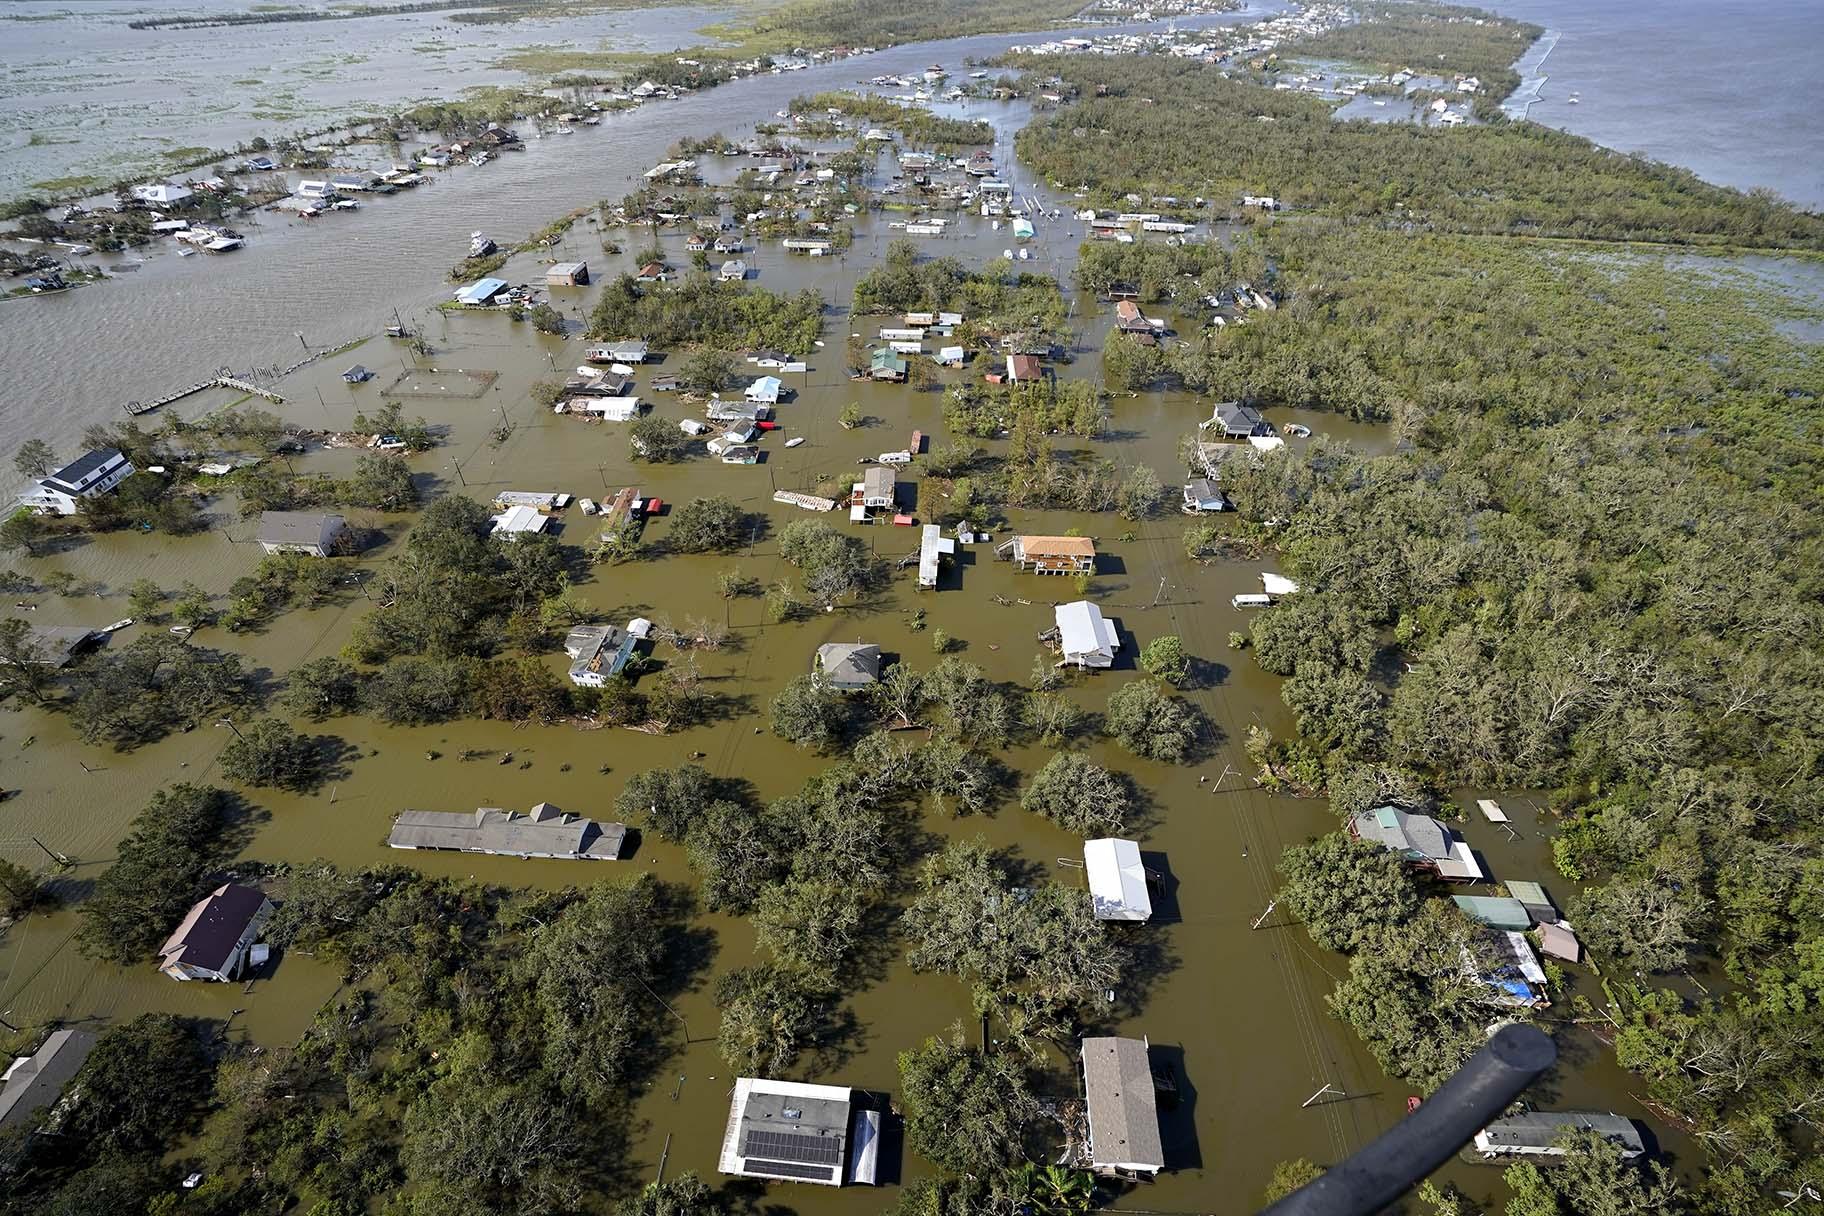 Homes are flooded in the aftermath of Hurricane Ida, Monday, Aug. 30, 2021, in Lafitte, La. The weather died down shortly before dawn. (AP Photo / David J. Phillip)